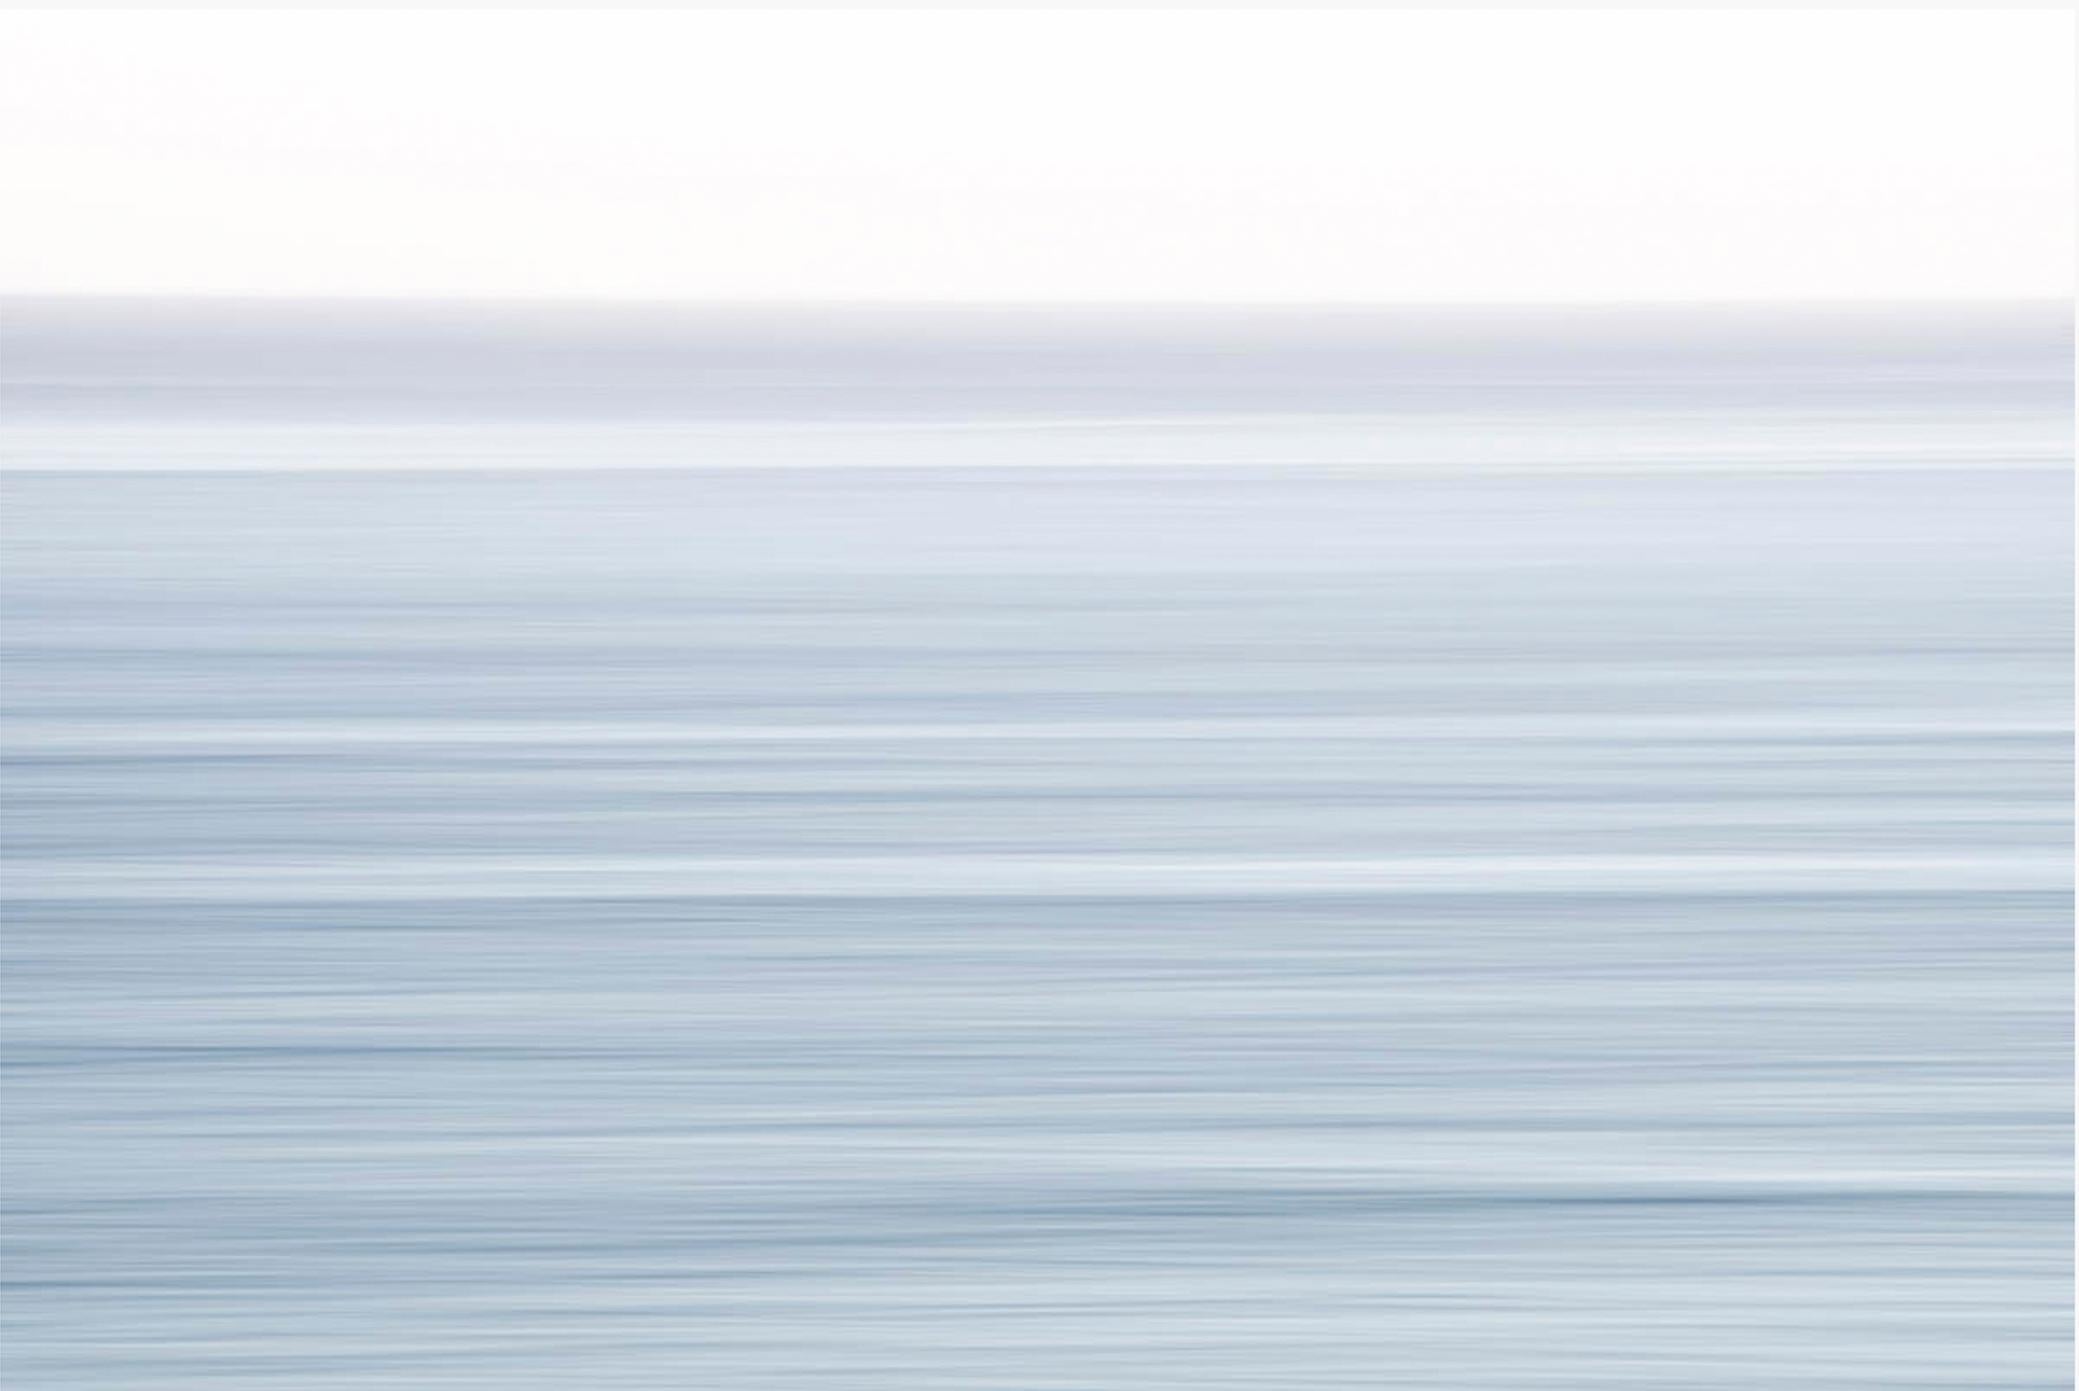 Tori Gagne Abstract Photograph - "Misty Morning" Contemporary Photograph, 32" x 48"